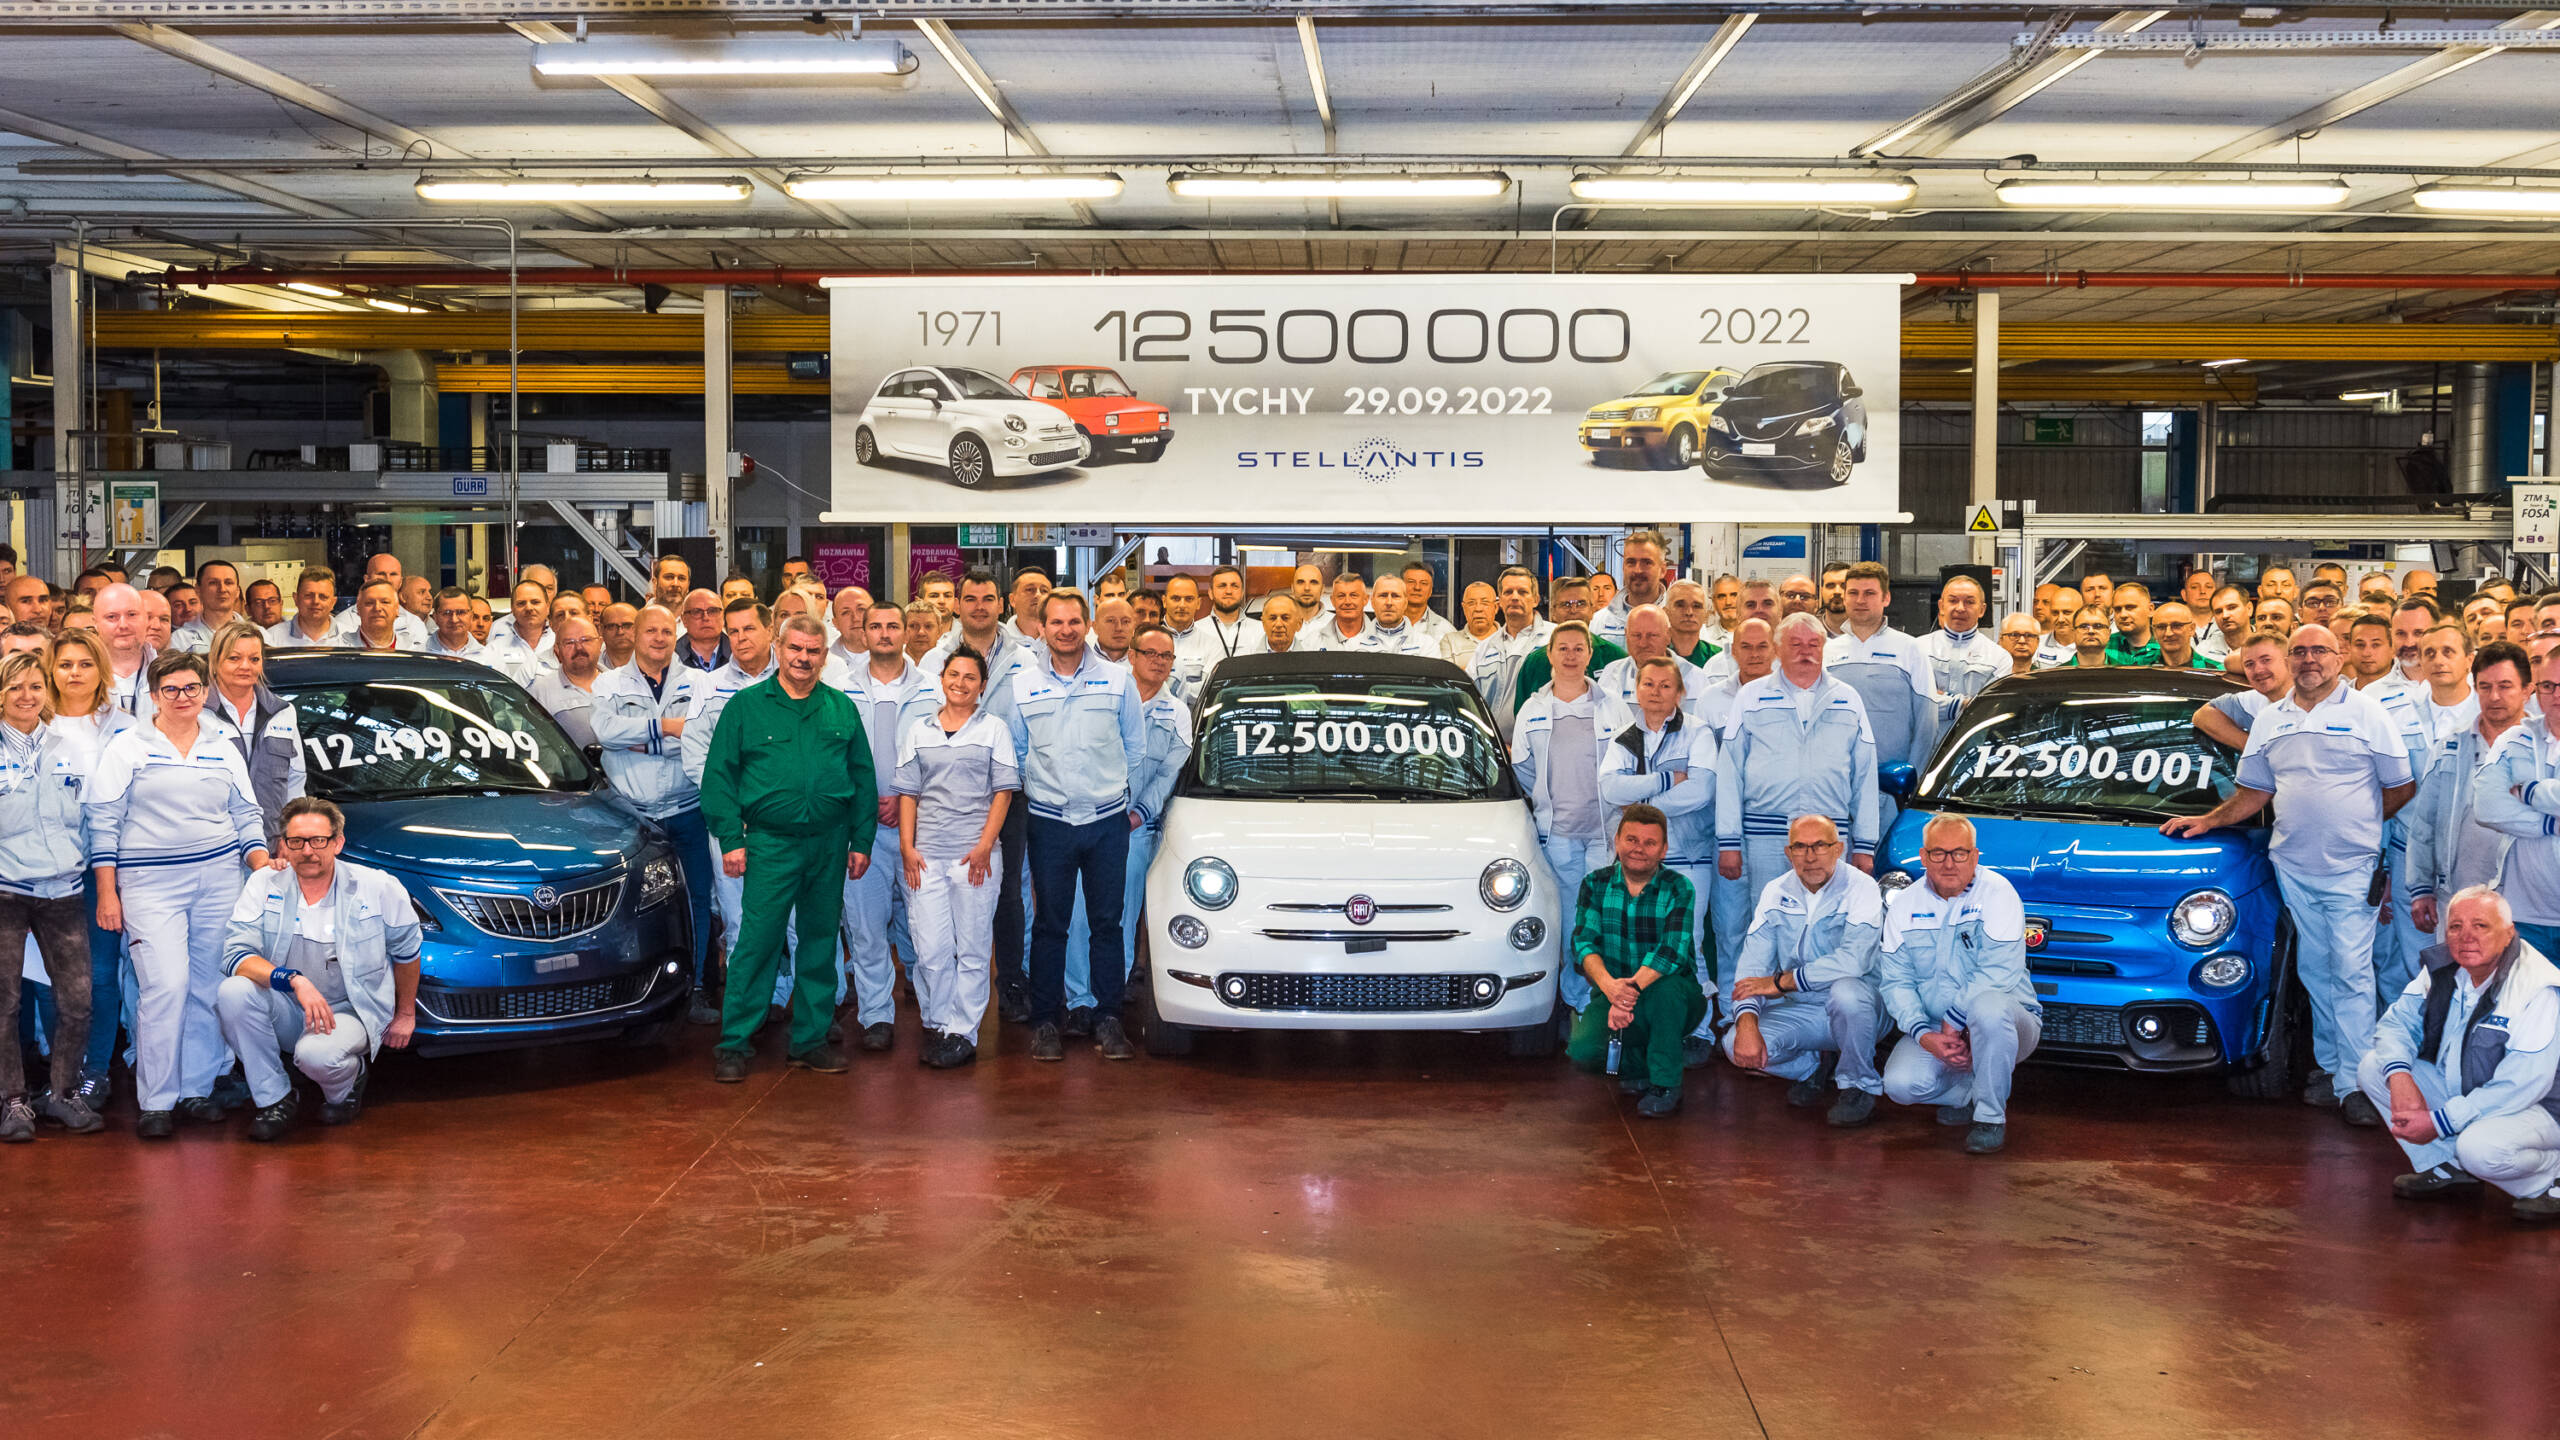 Stellantis in Tychy celebrates the production of 12,500,000 vehicles